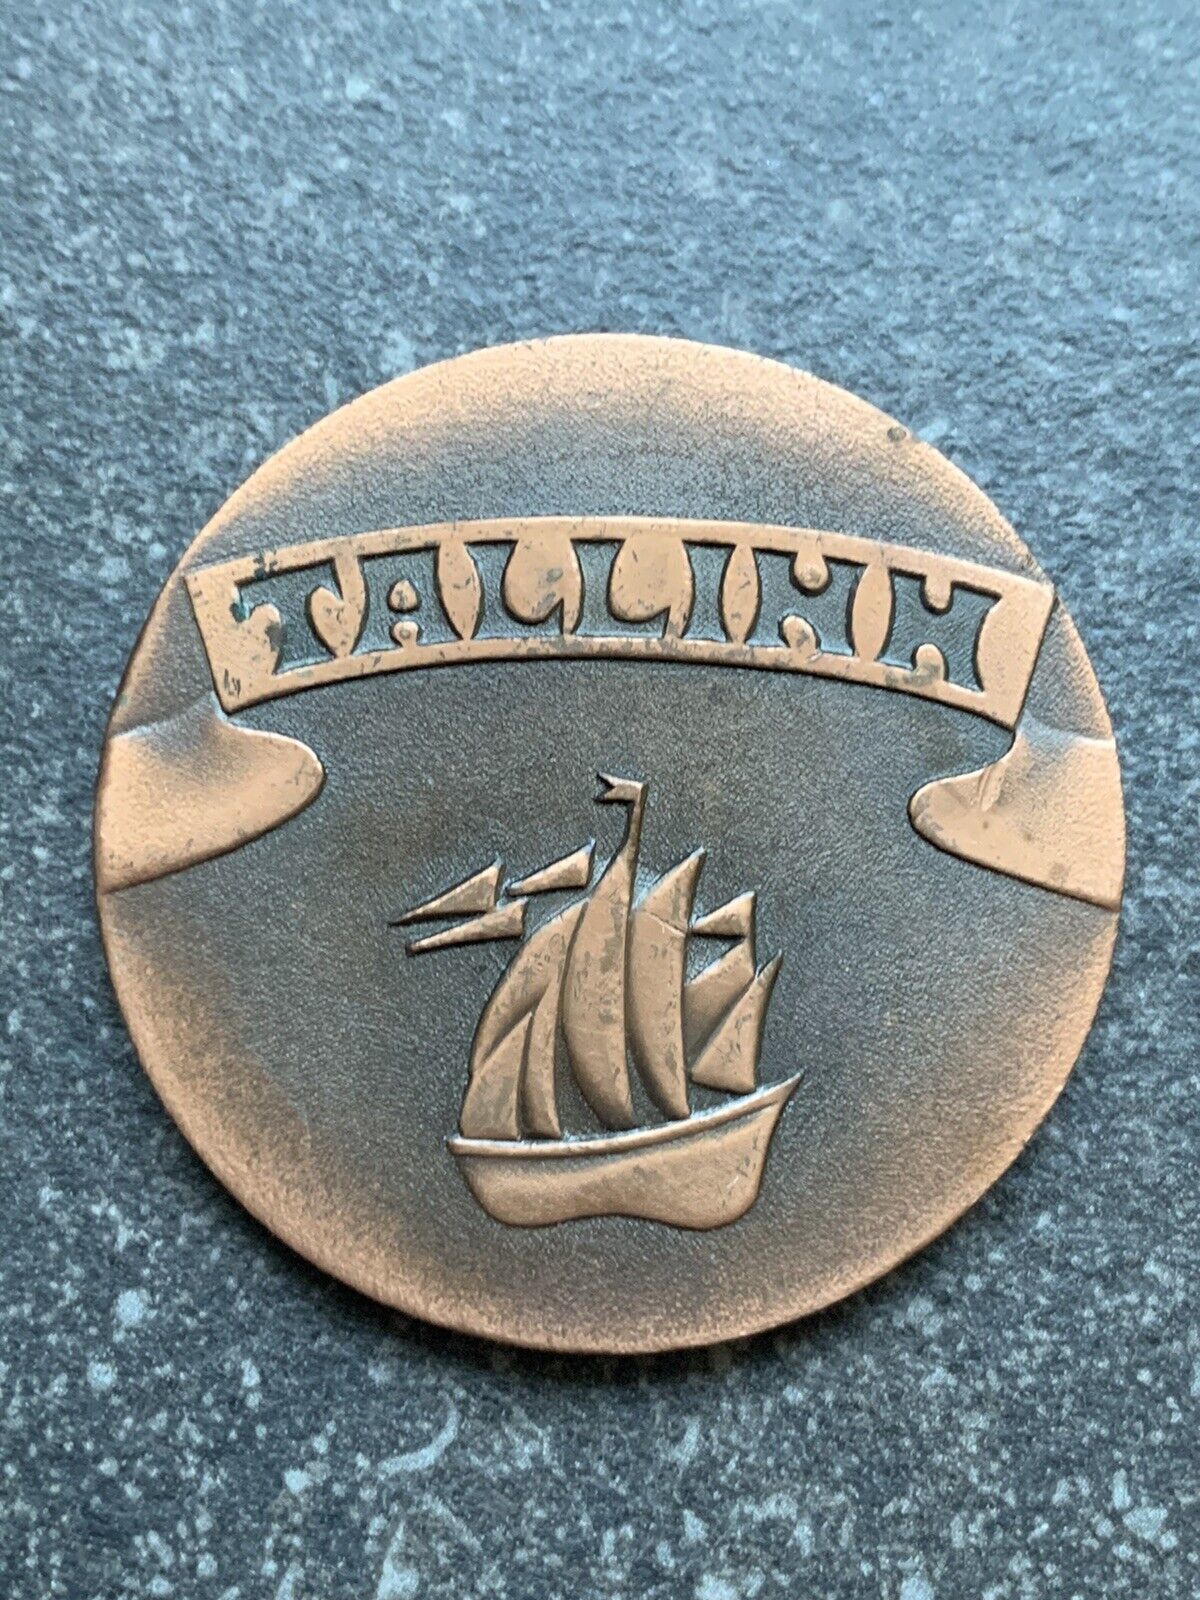 Primary image for Estonia Collectible Medal In Honor Of Tallinn City